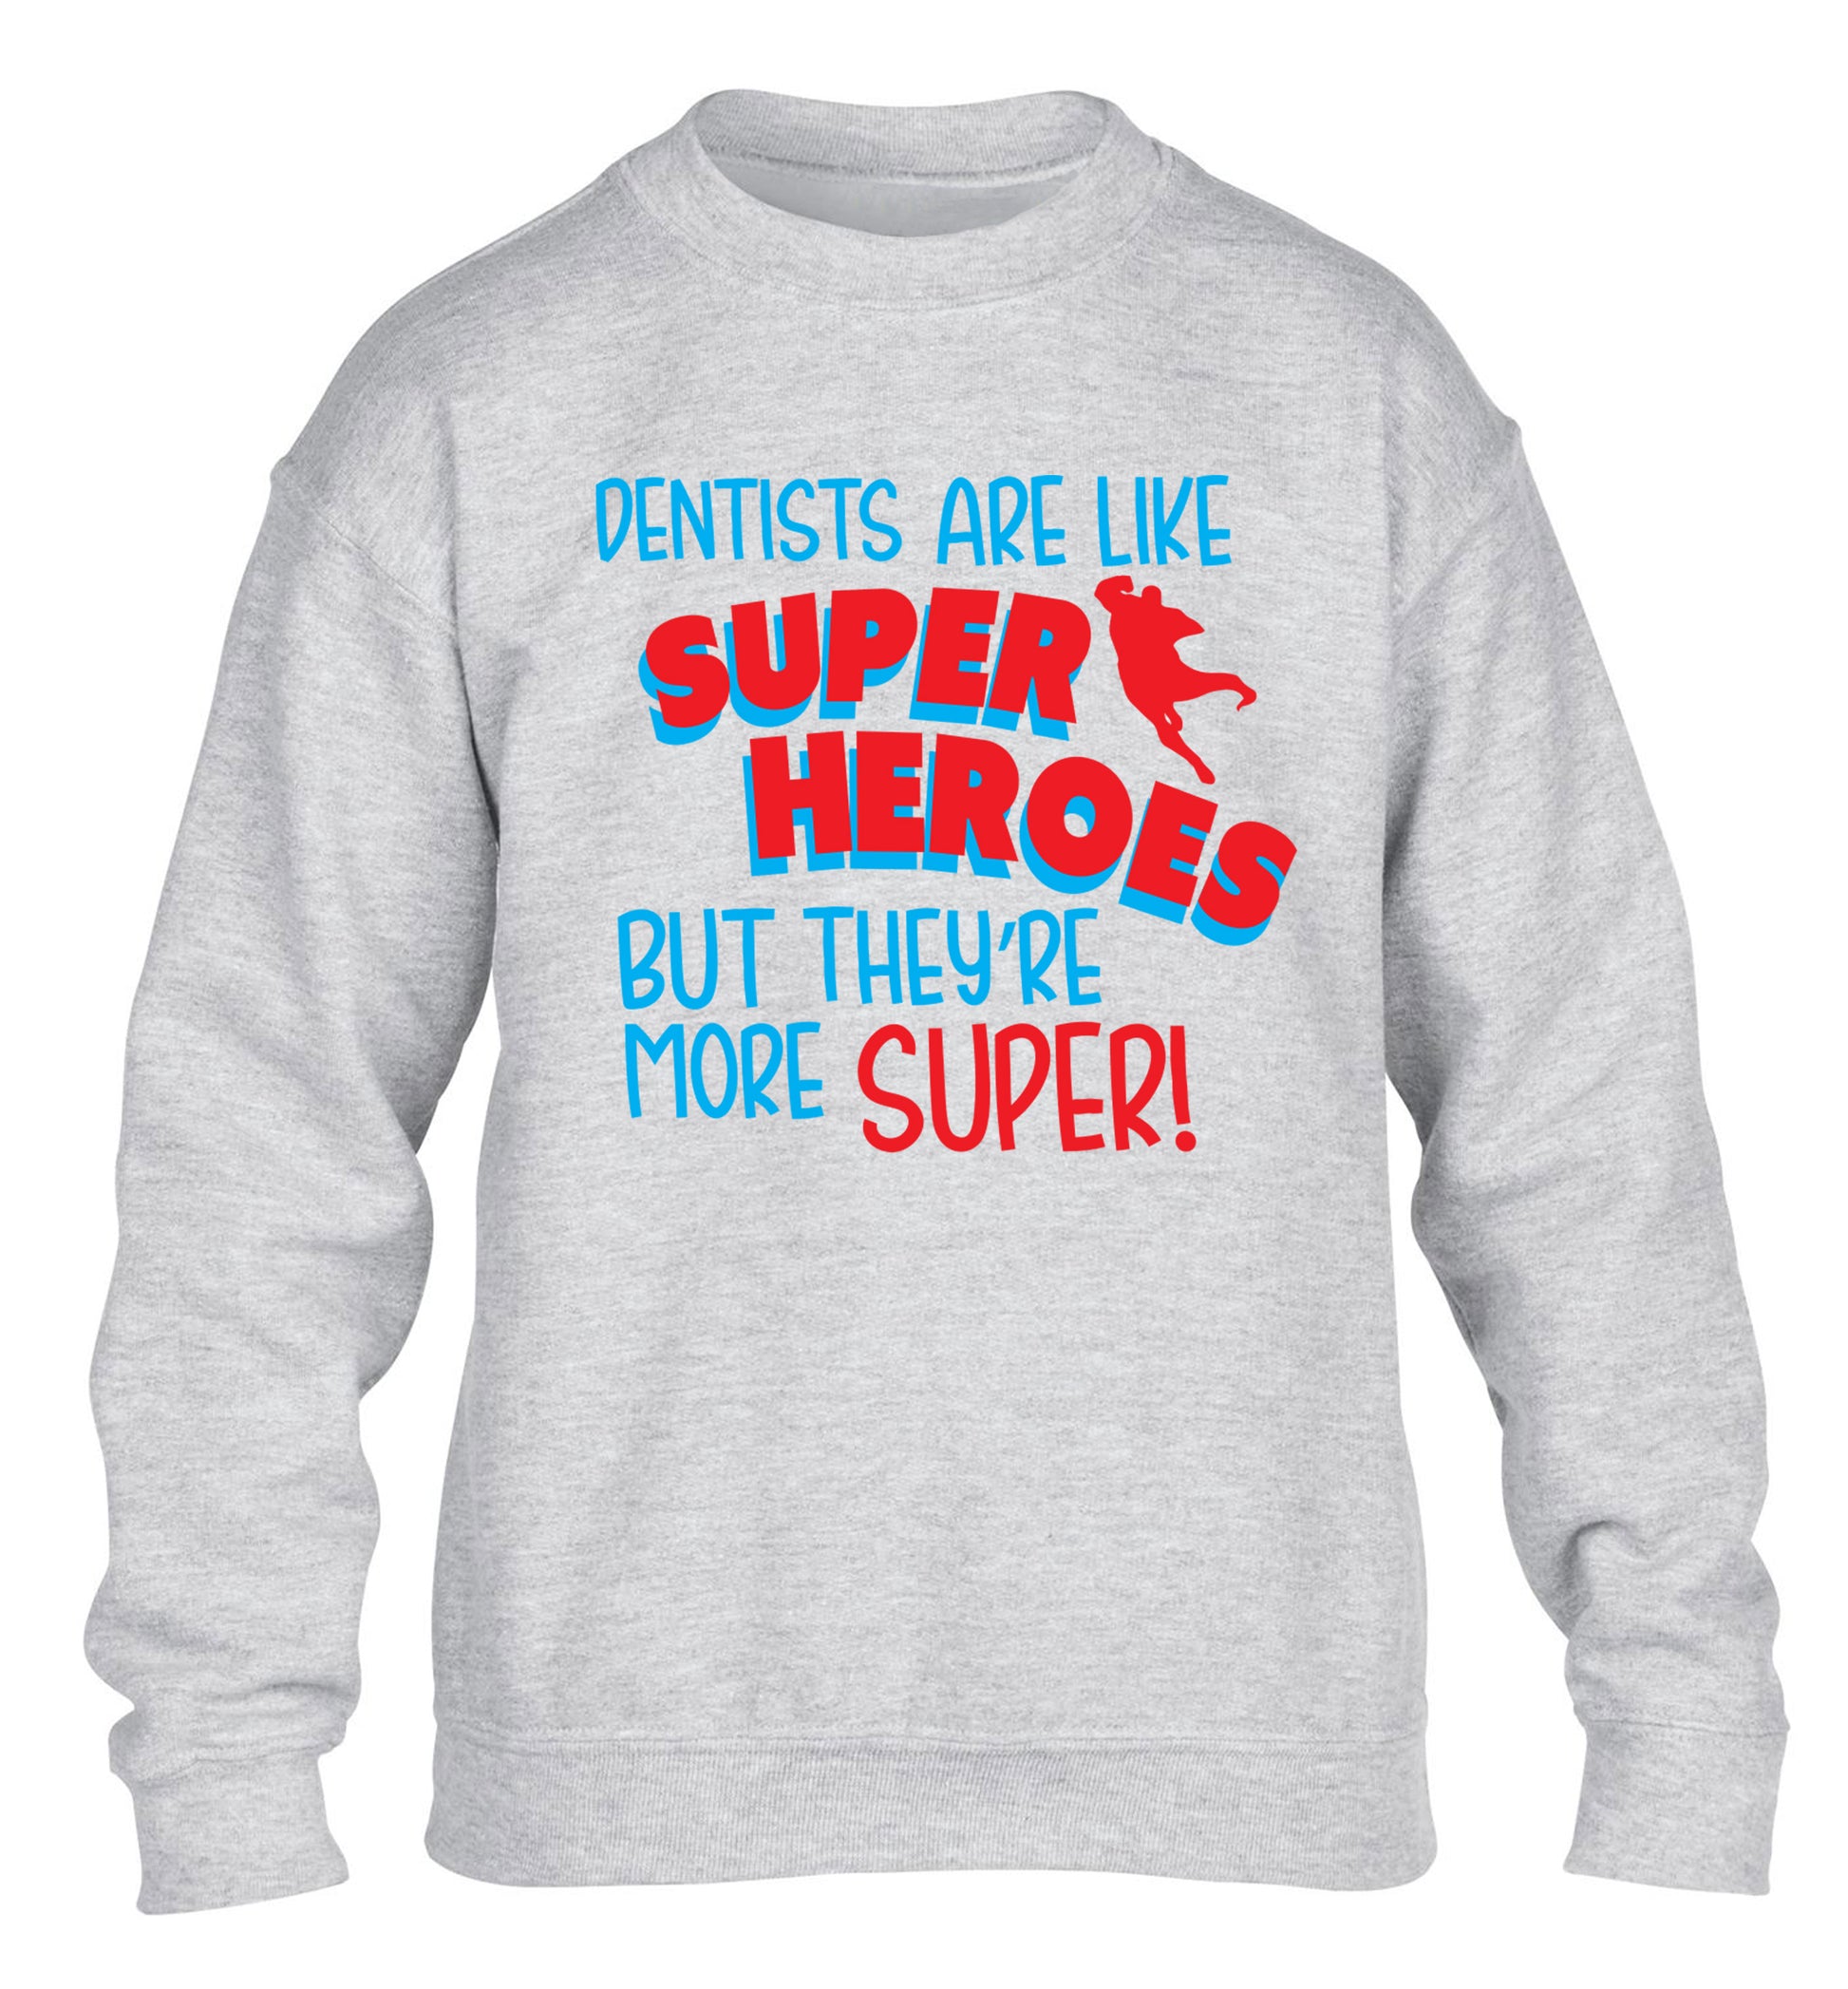 Dentists are like superheros but they're more super children's grey sweater 12-13 Years